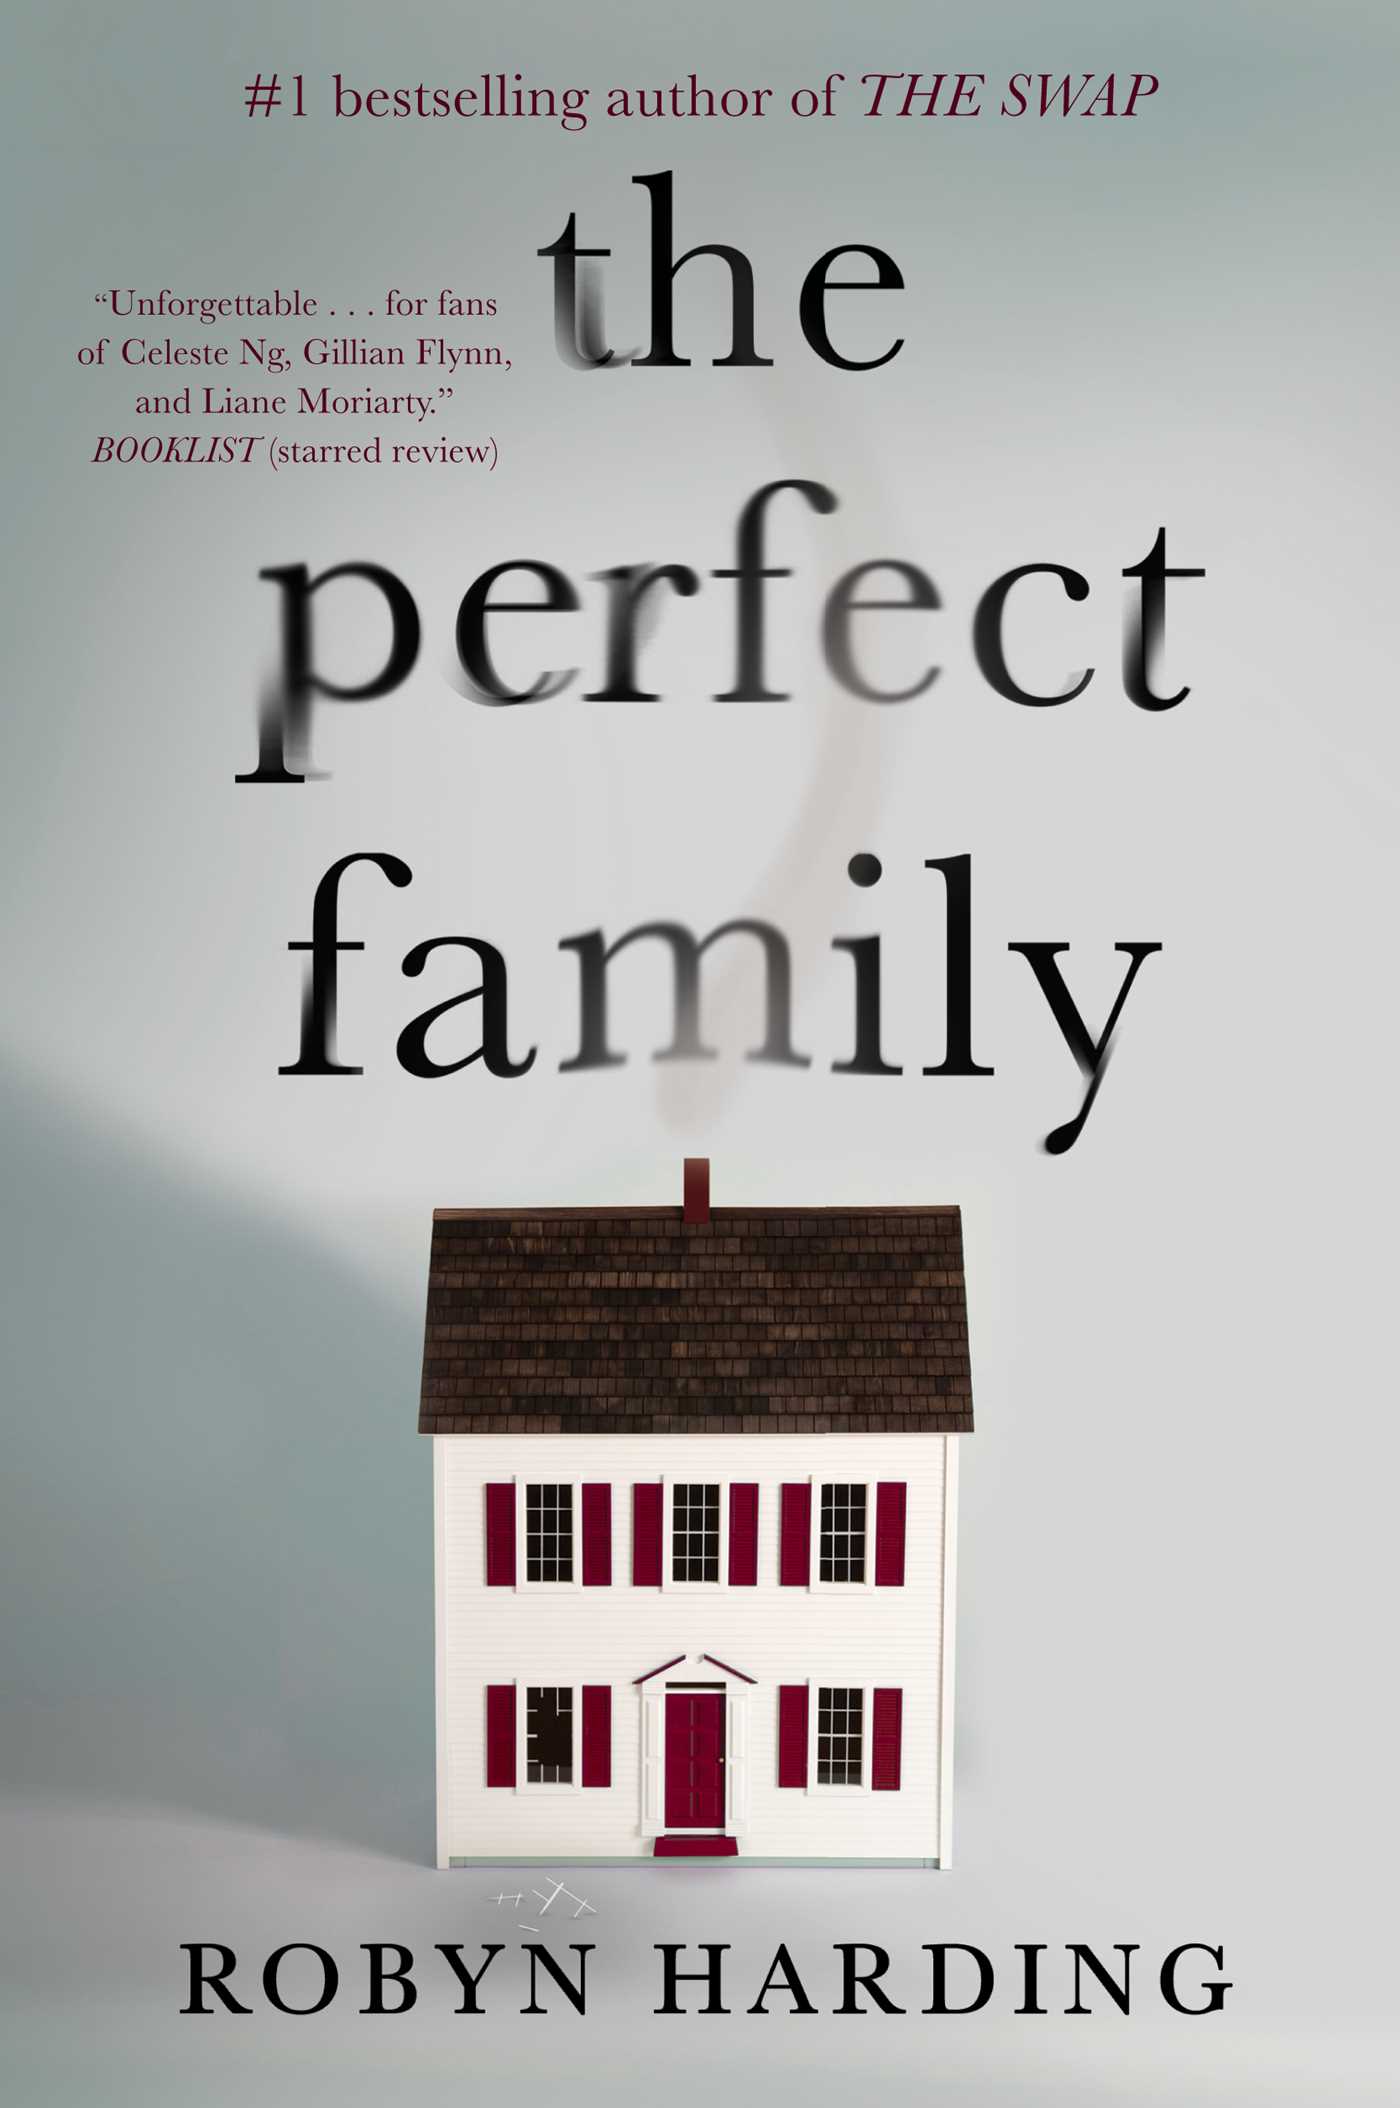 Robyn Harding's The Perfect Family book cover